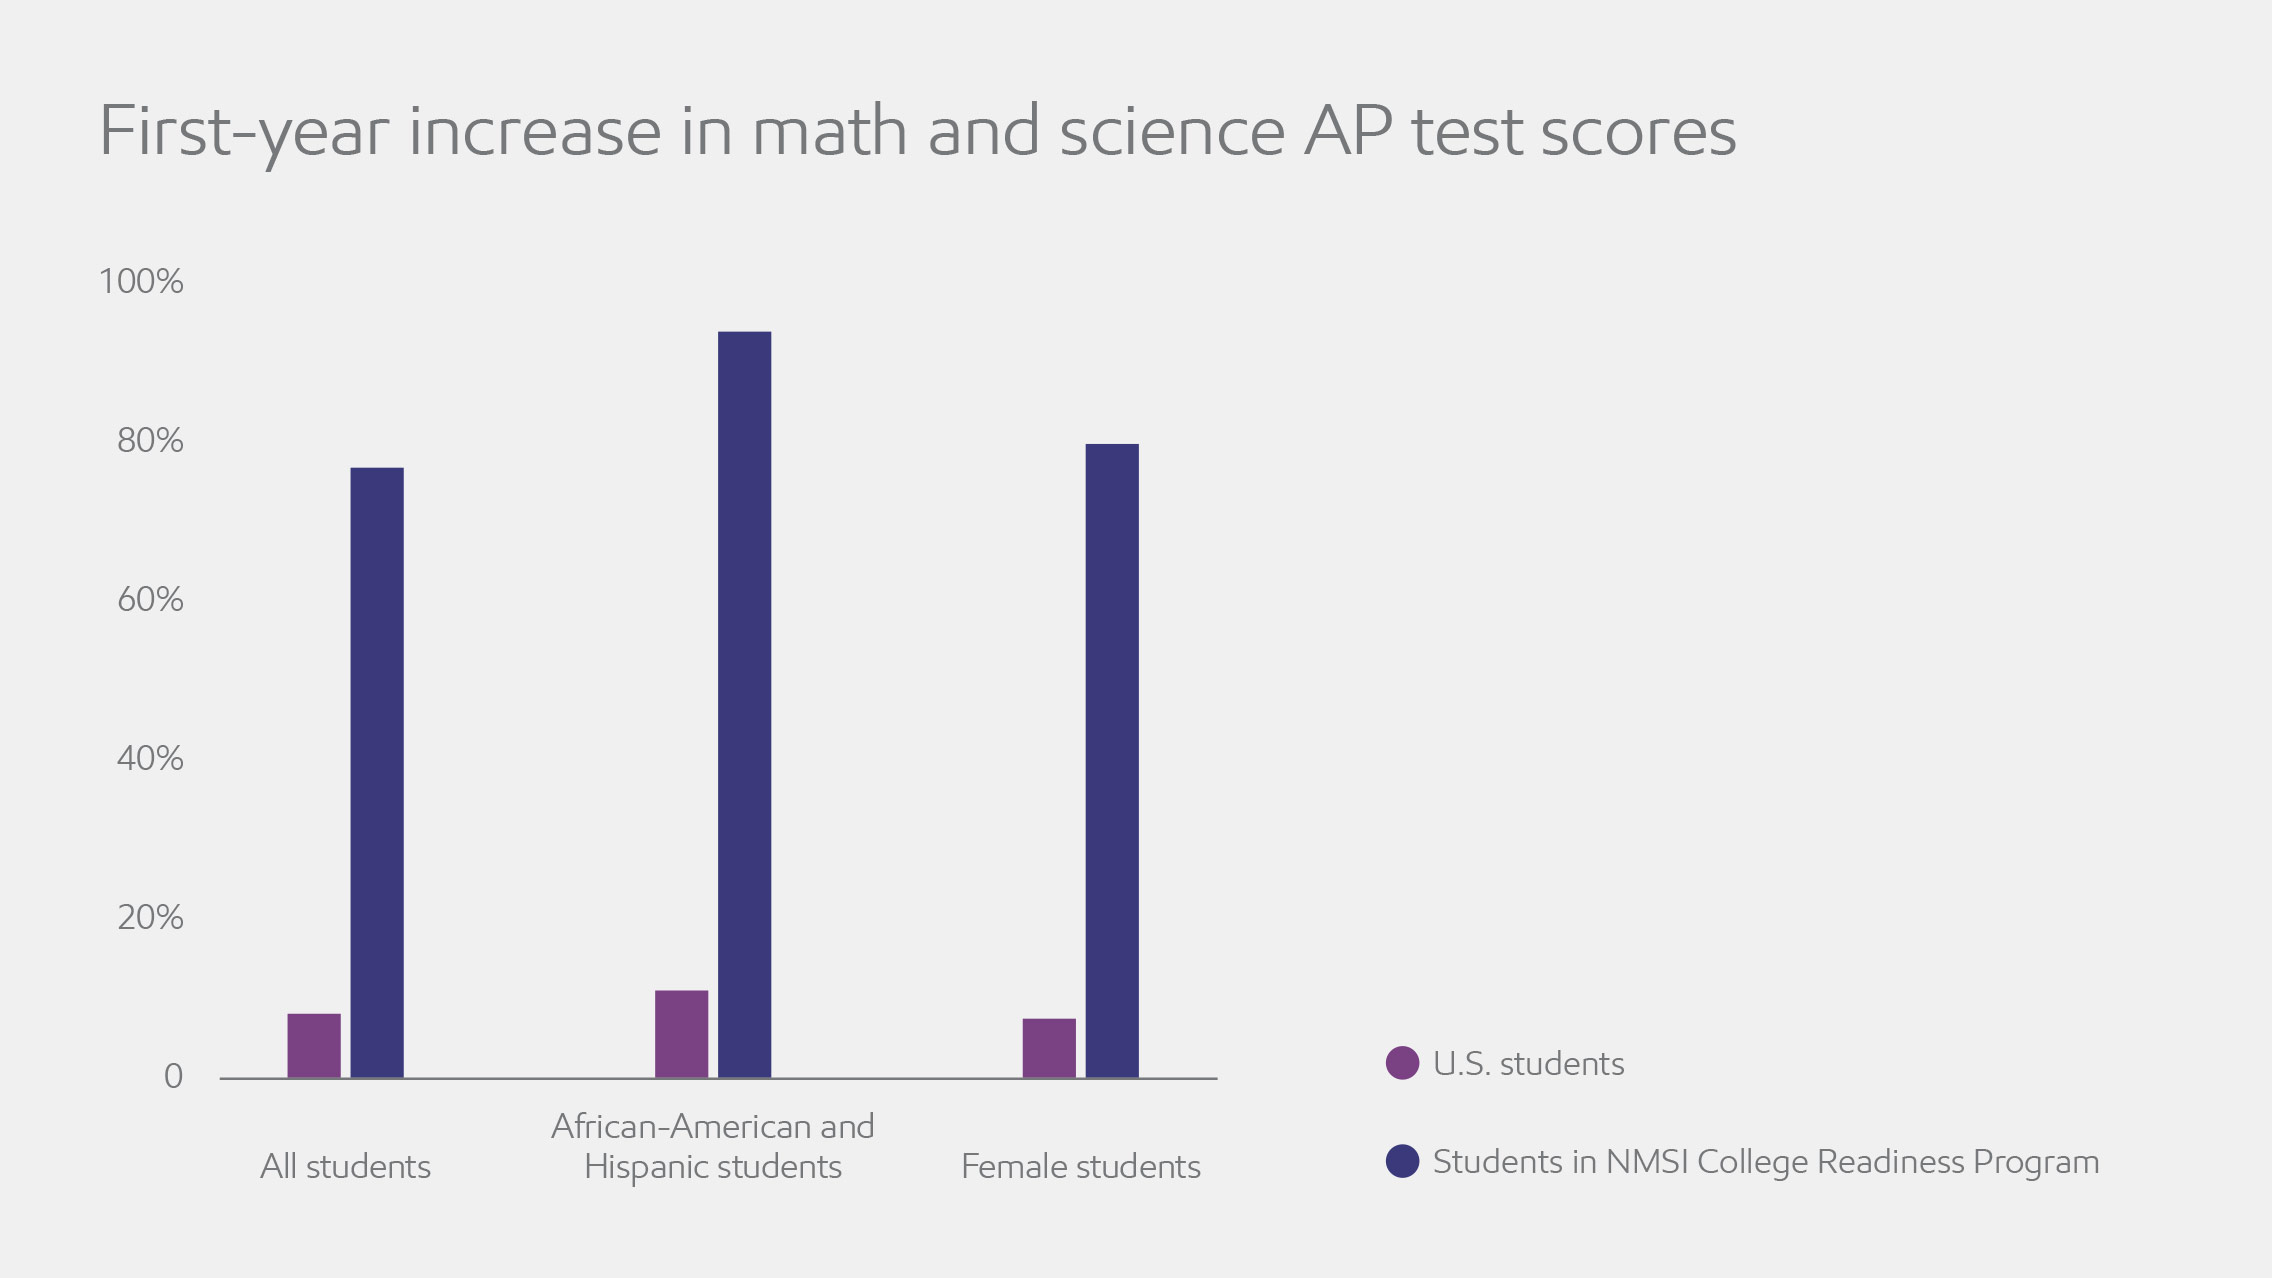 Chart showing first-year increase in math and science AP test scores. 